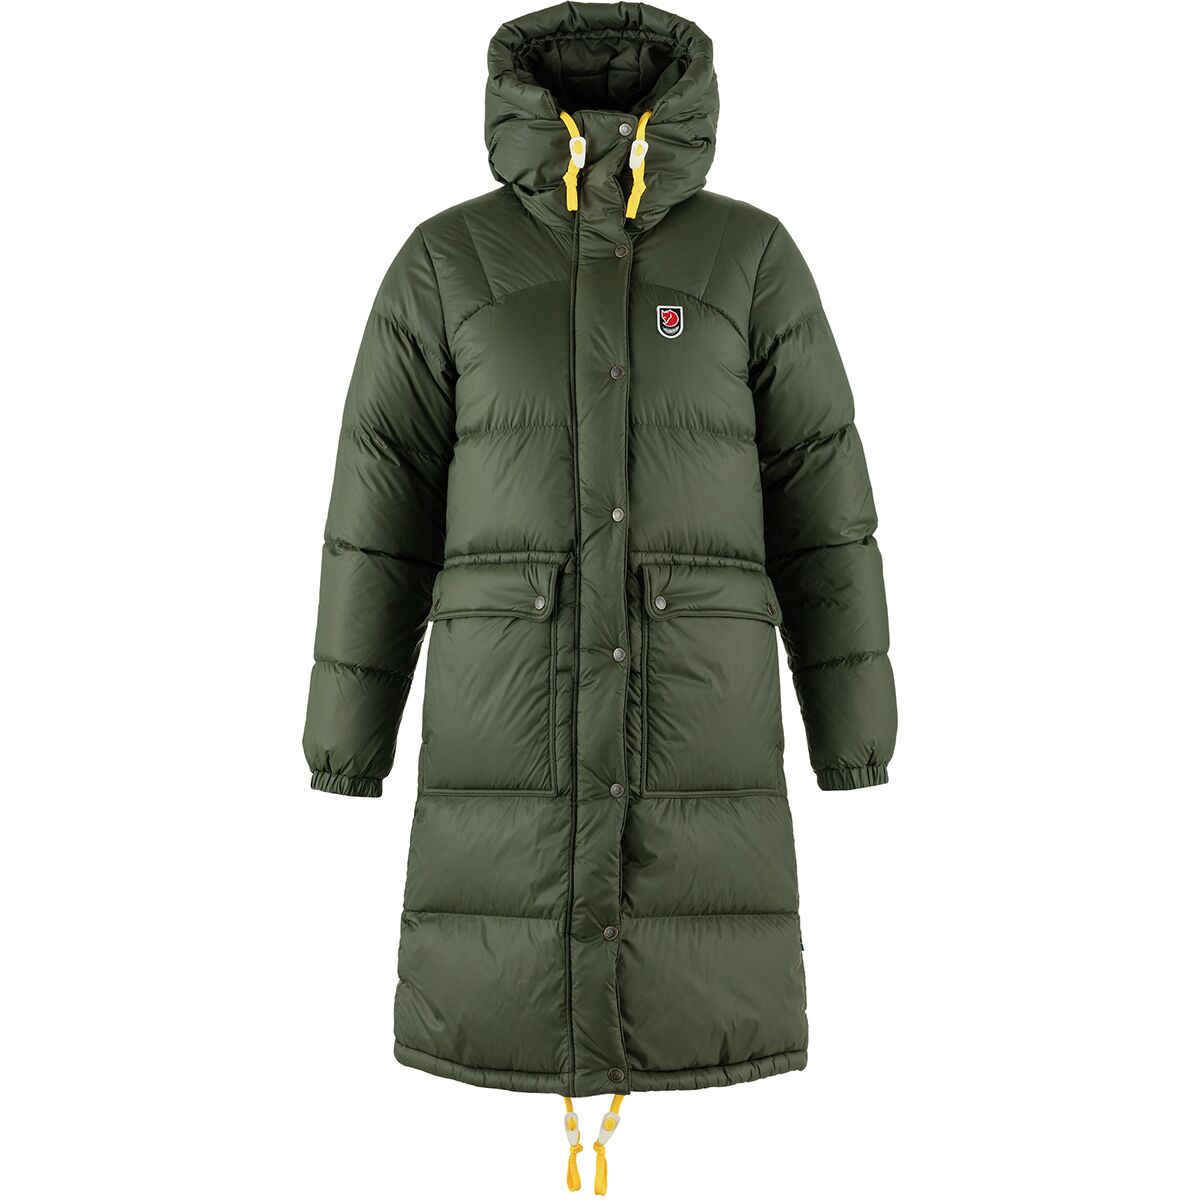 Expedition Long Down Parka - Women